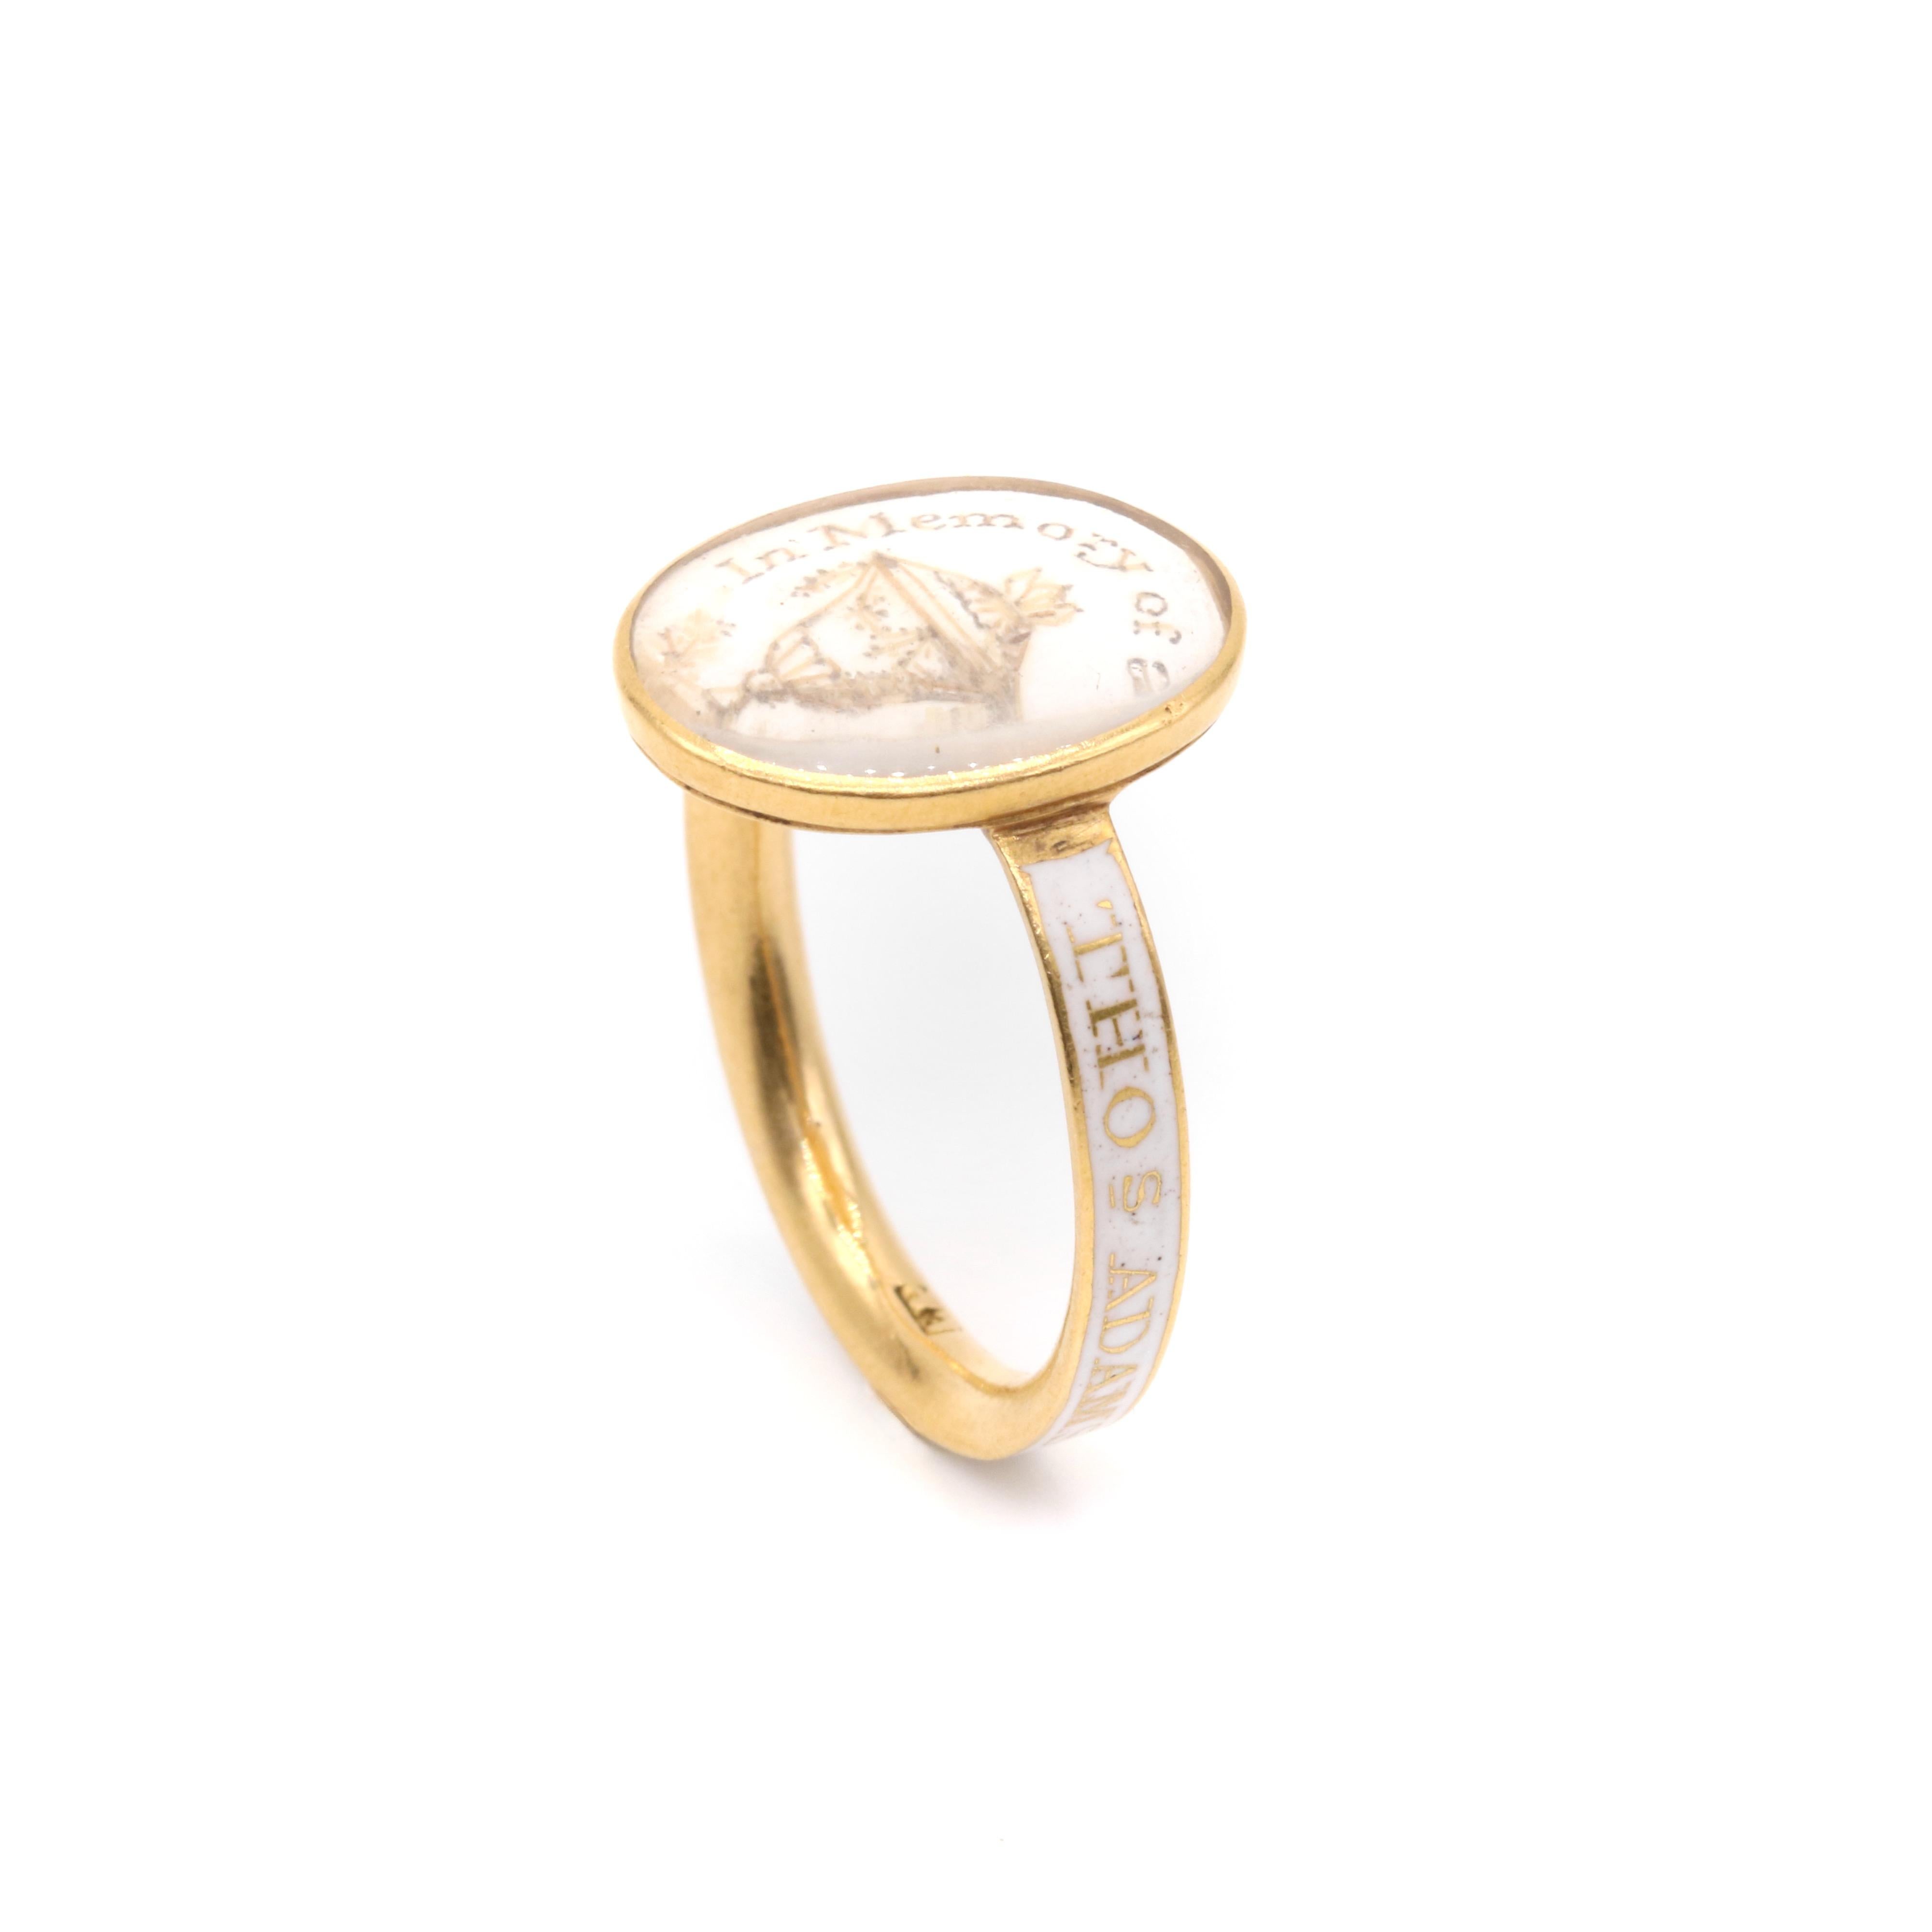 Georgian 1770s 18K Gold White Enamel Urn “In Memory of a Friend” Mourning Ring For Sale 5